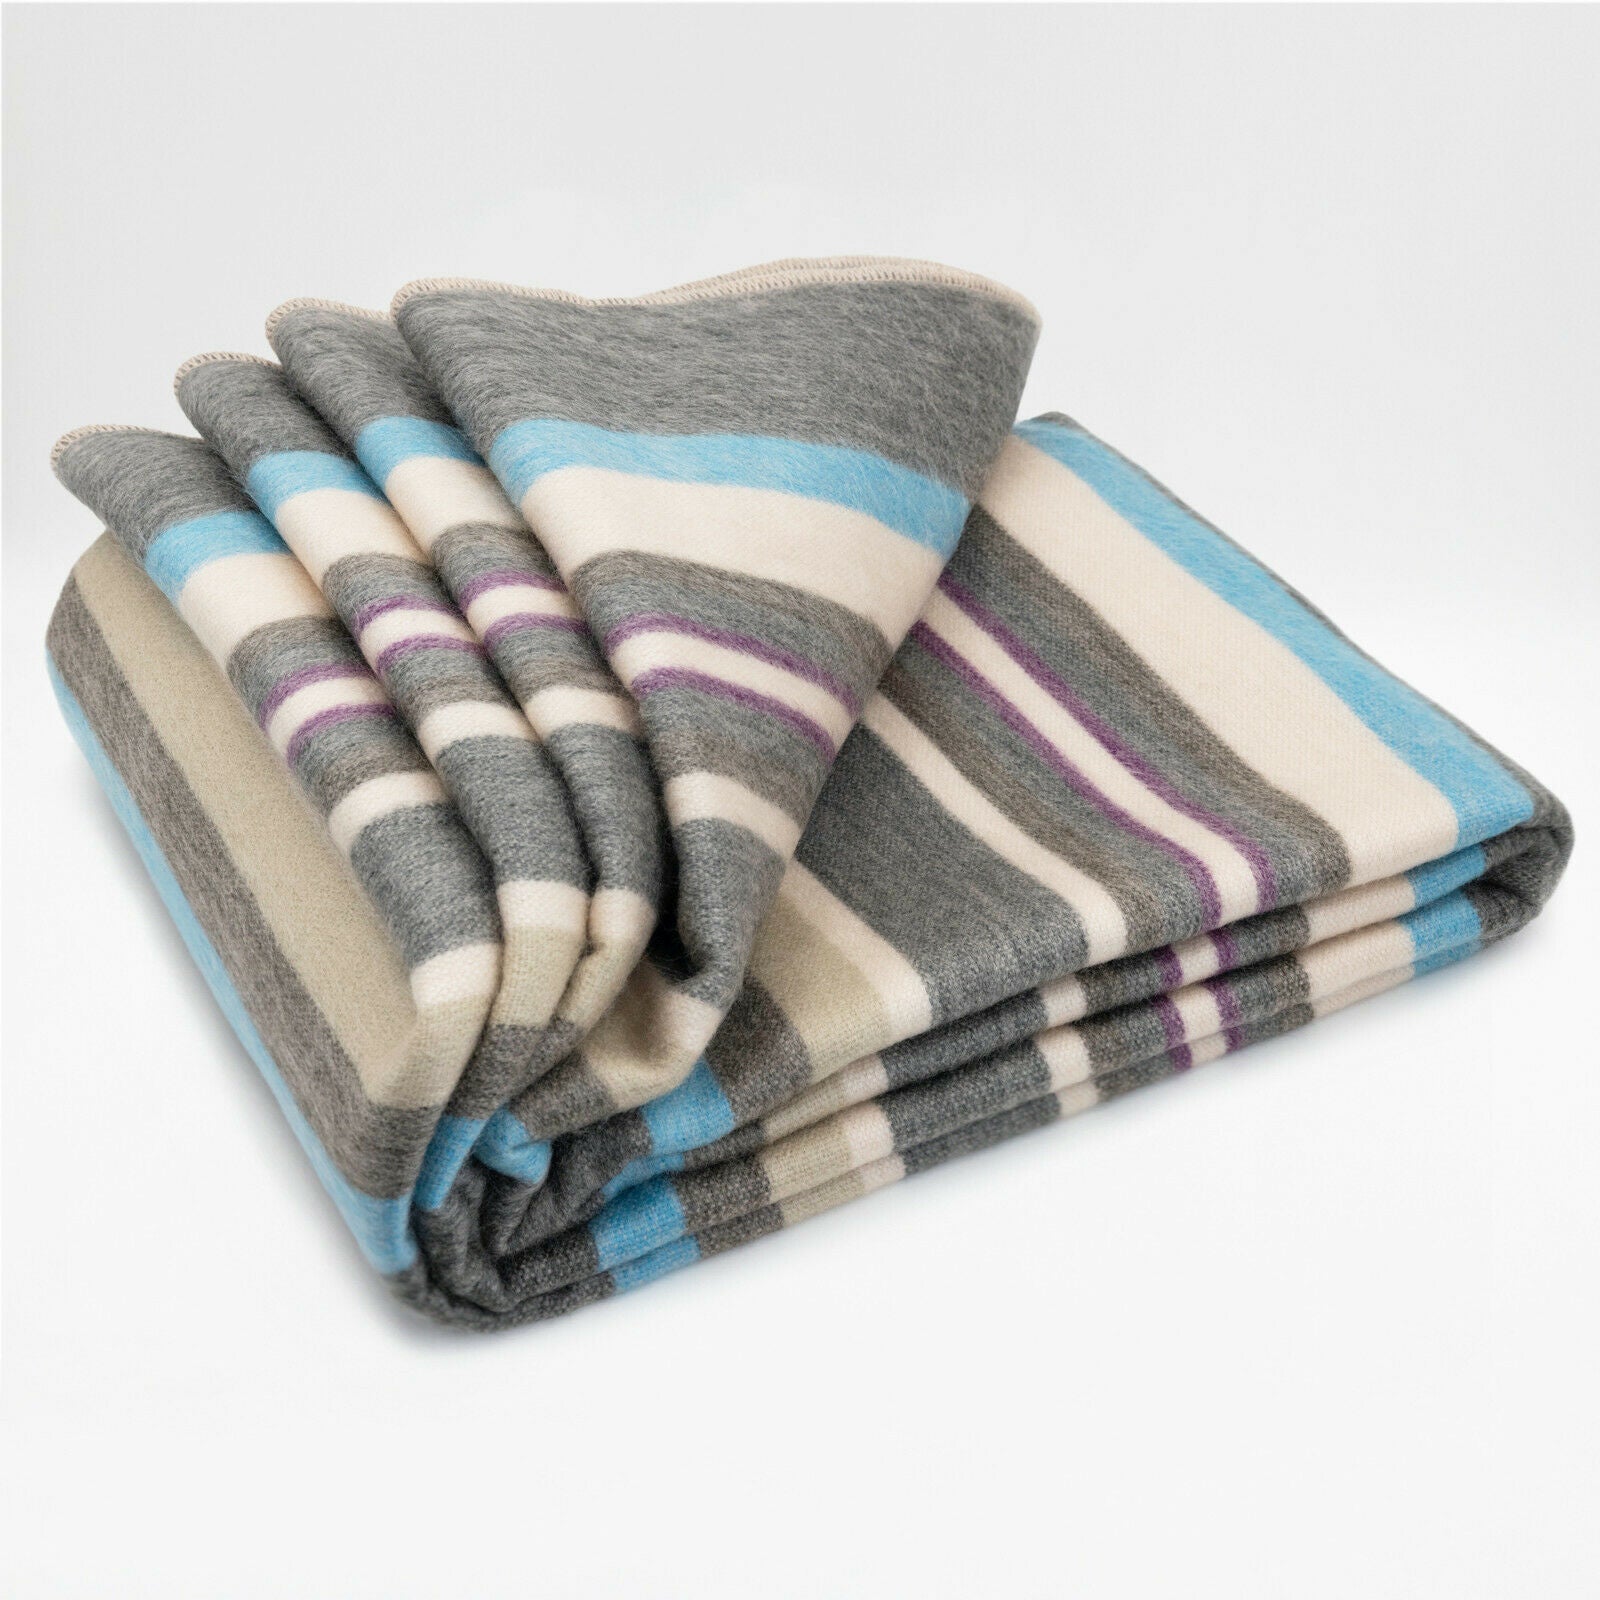 Ujucan - Baby Alpaca Wool Throw Blanket / Sofa Cover - Queen 95" x 66" - turquoise gray stripes pattern